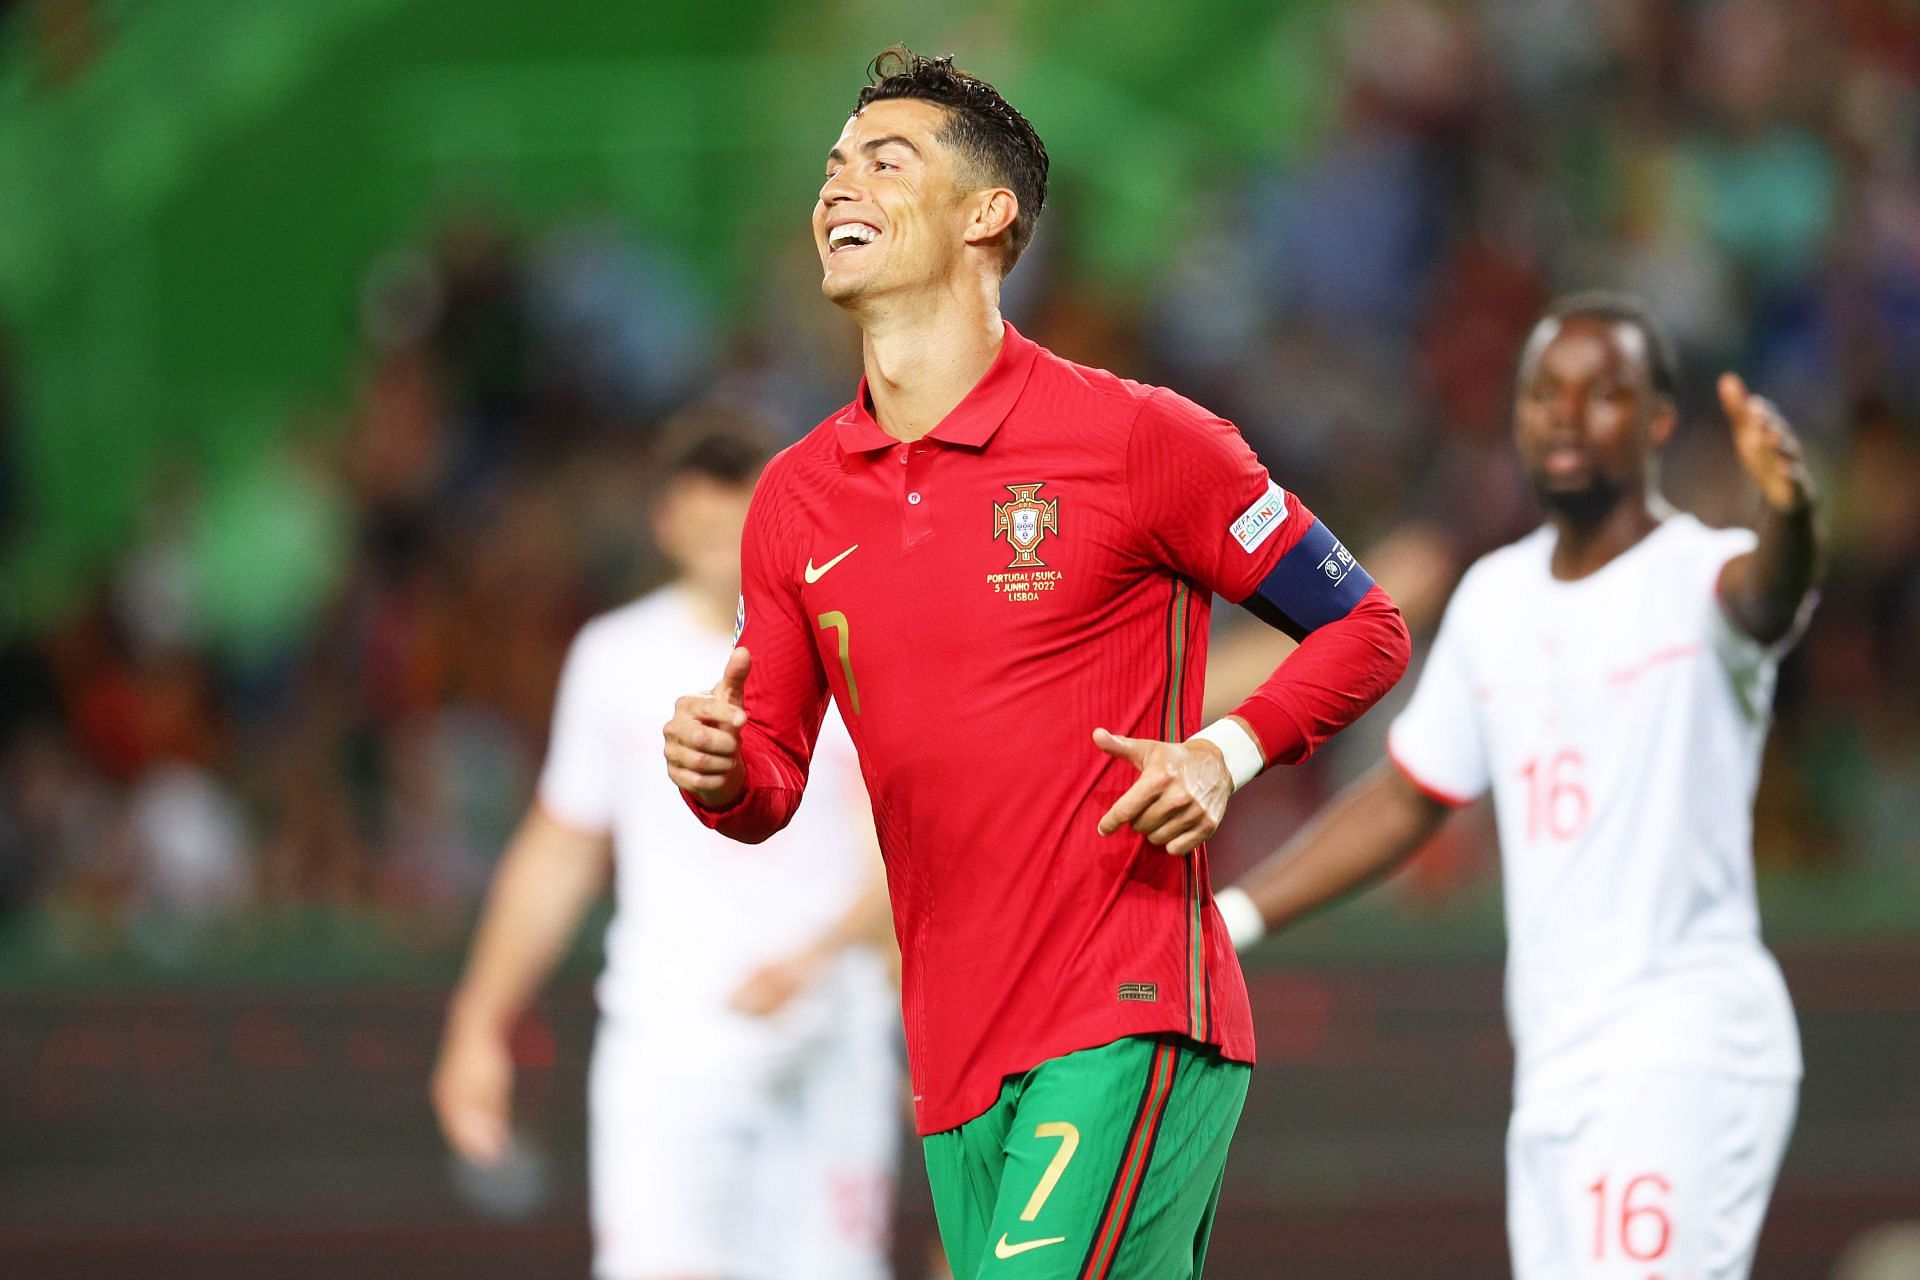 The Portuguese skipper took his tally to 117 international goals!